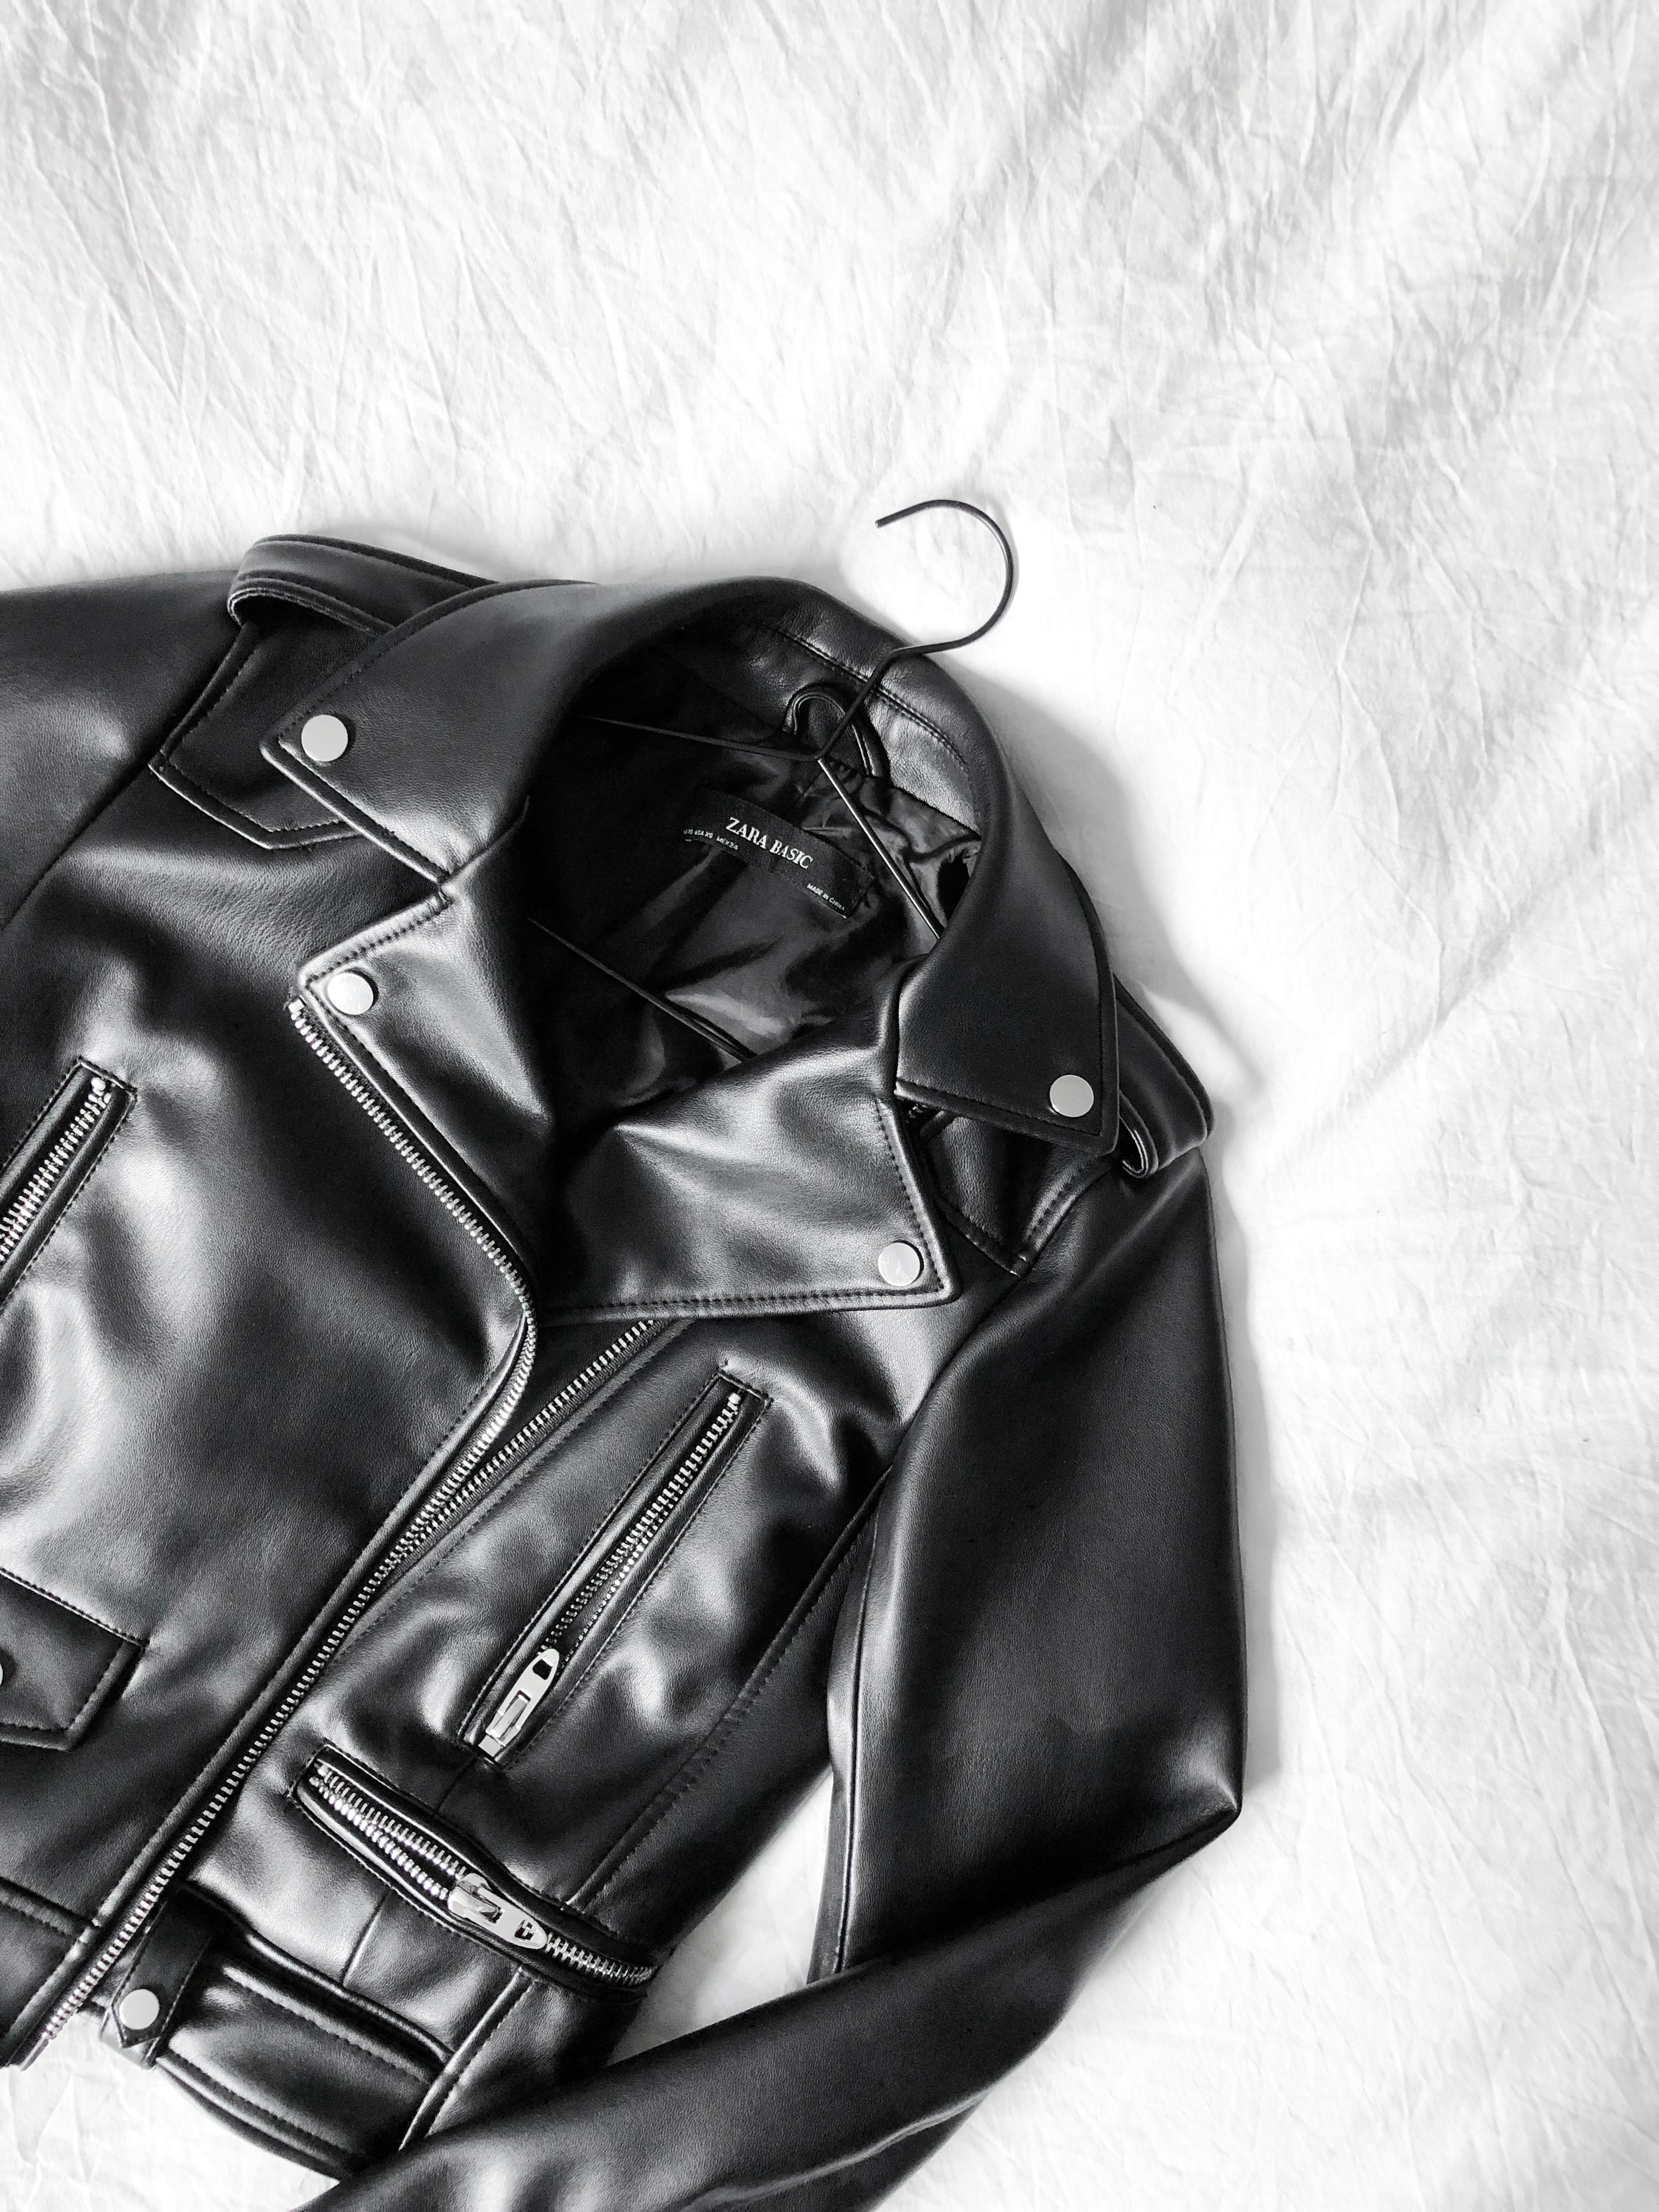 How to Take Care of a Leather Jacket